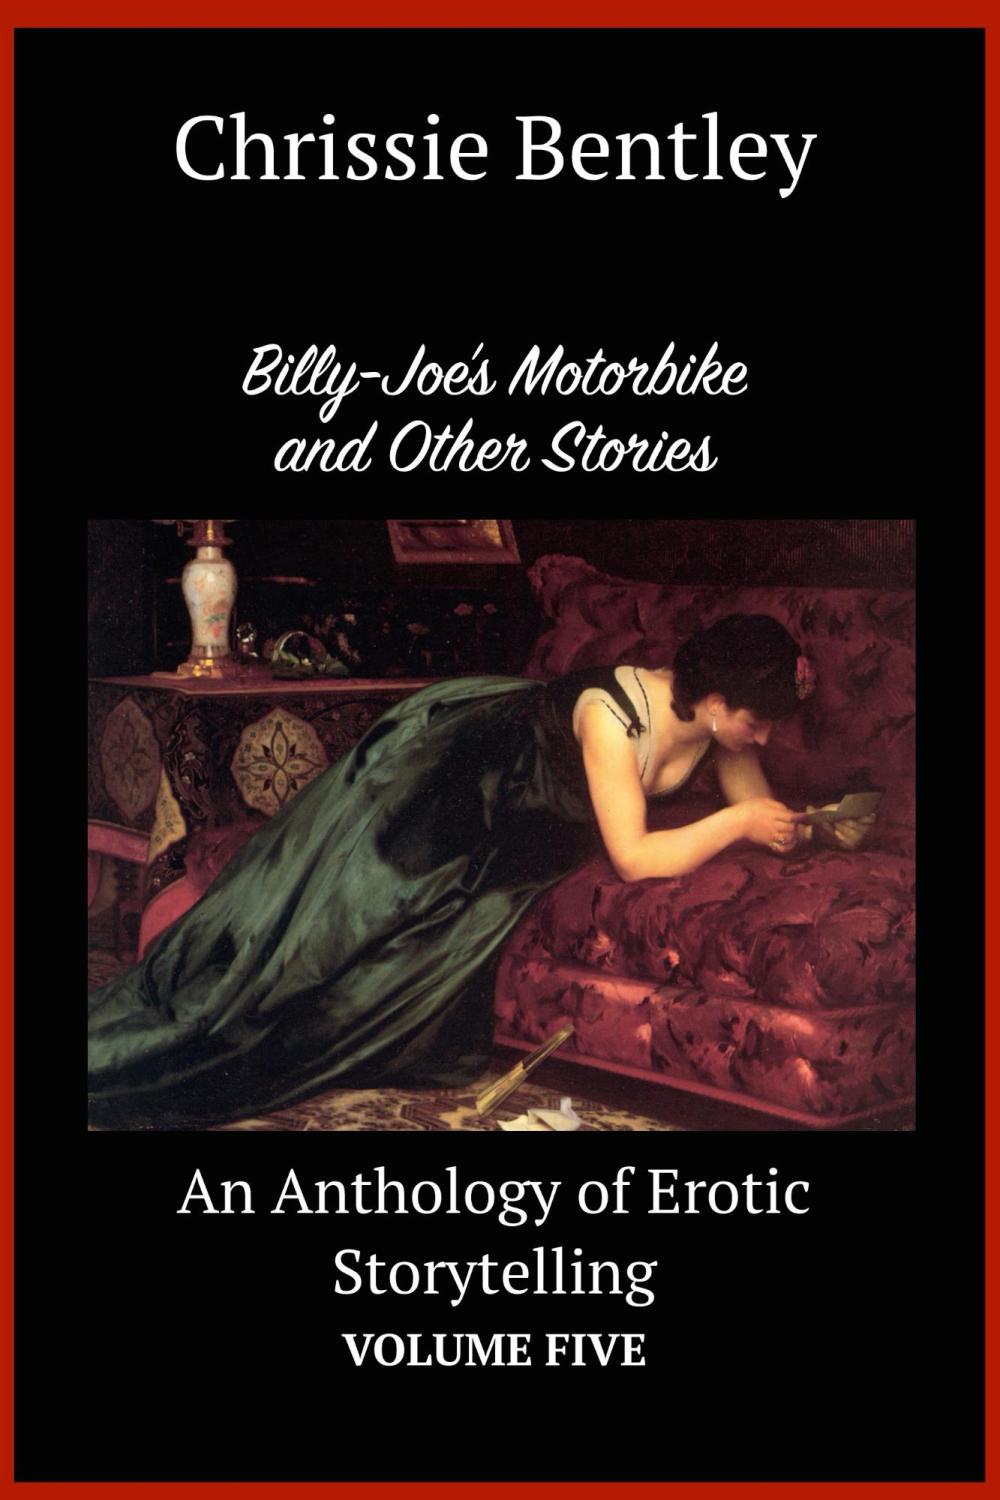 billyjoes_motorbik_cover_for_kindle